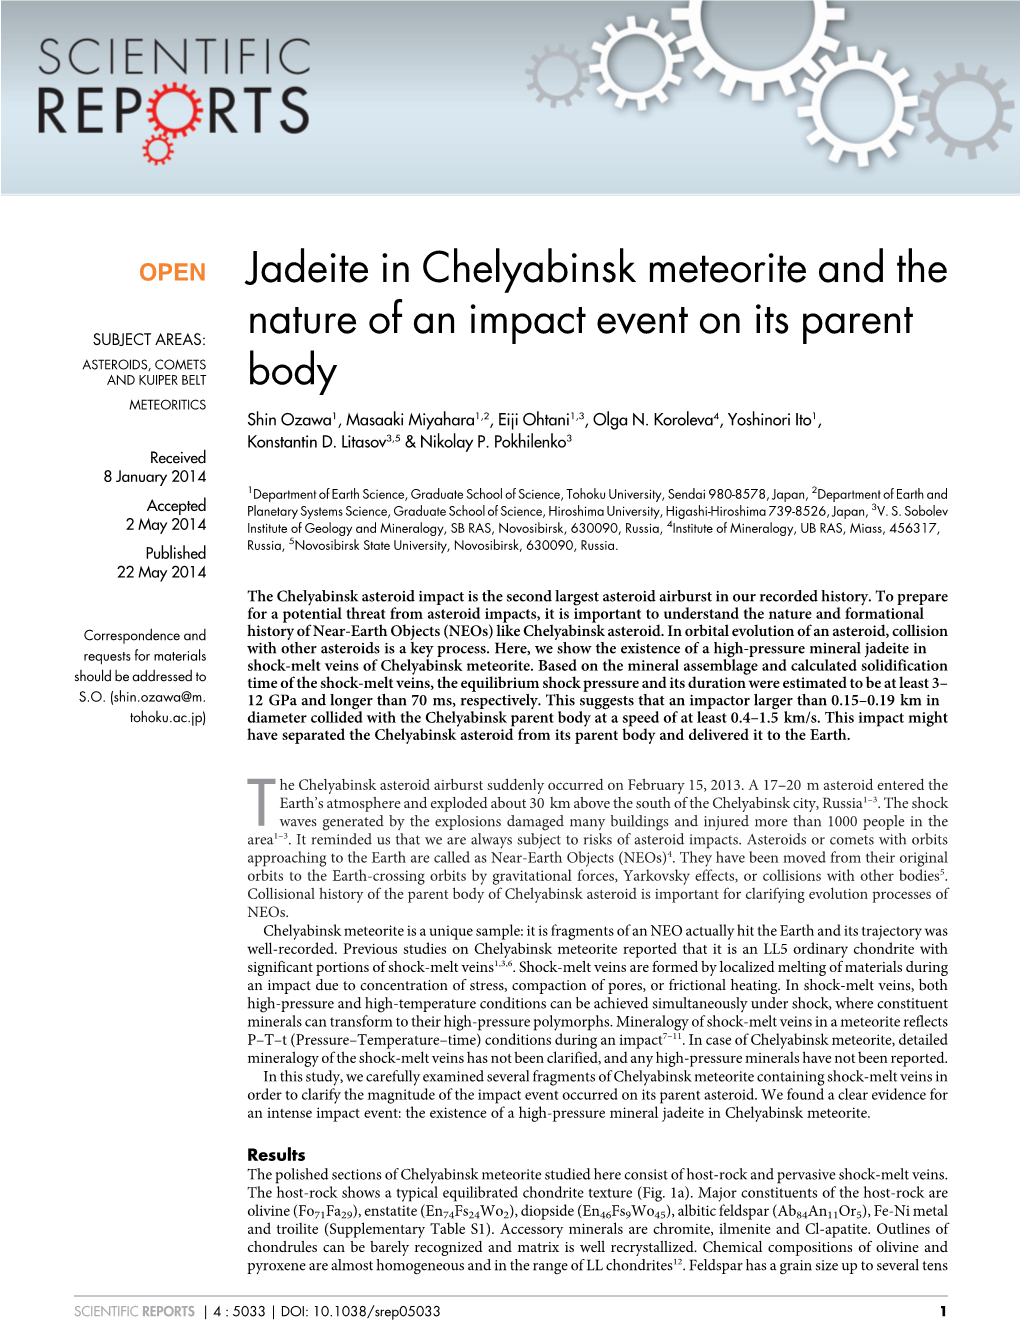 Jadeite in Chelyabinsk Meteorite and the Nature of an Impact Event on Its